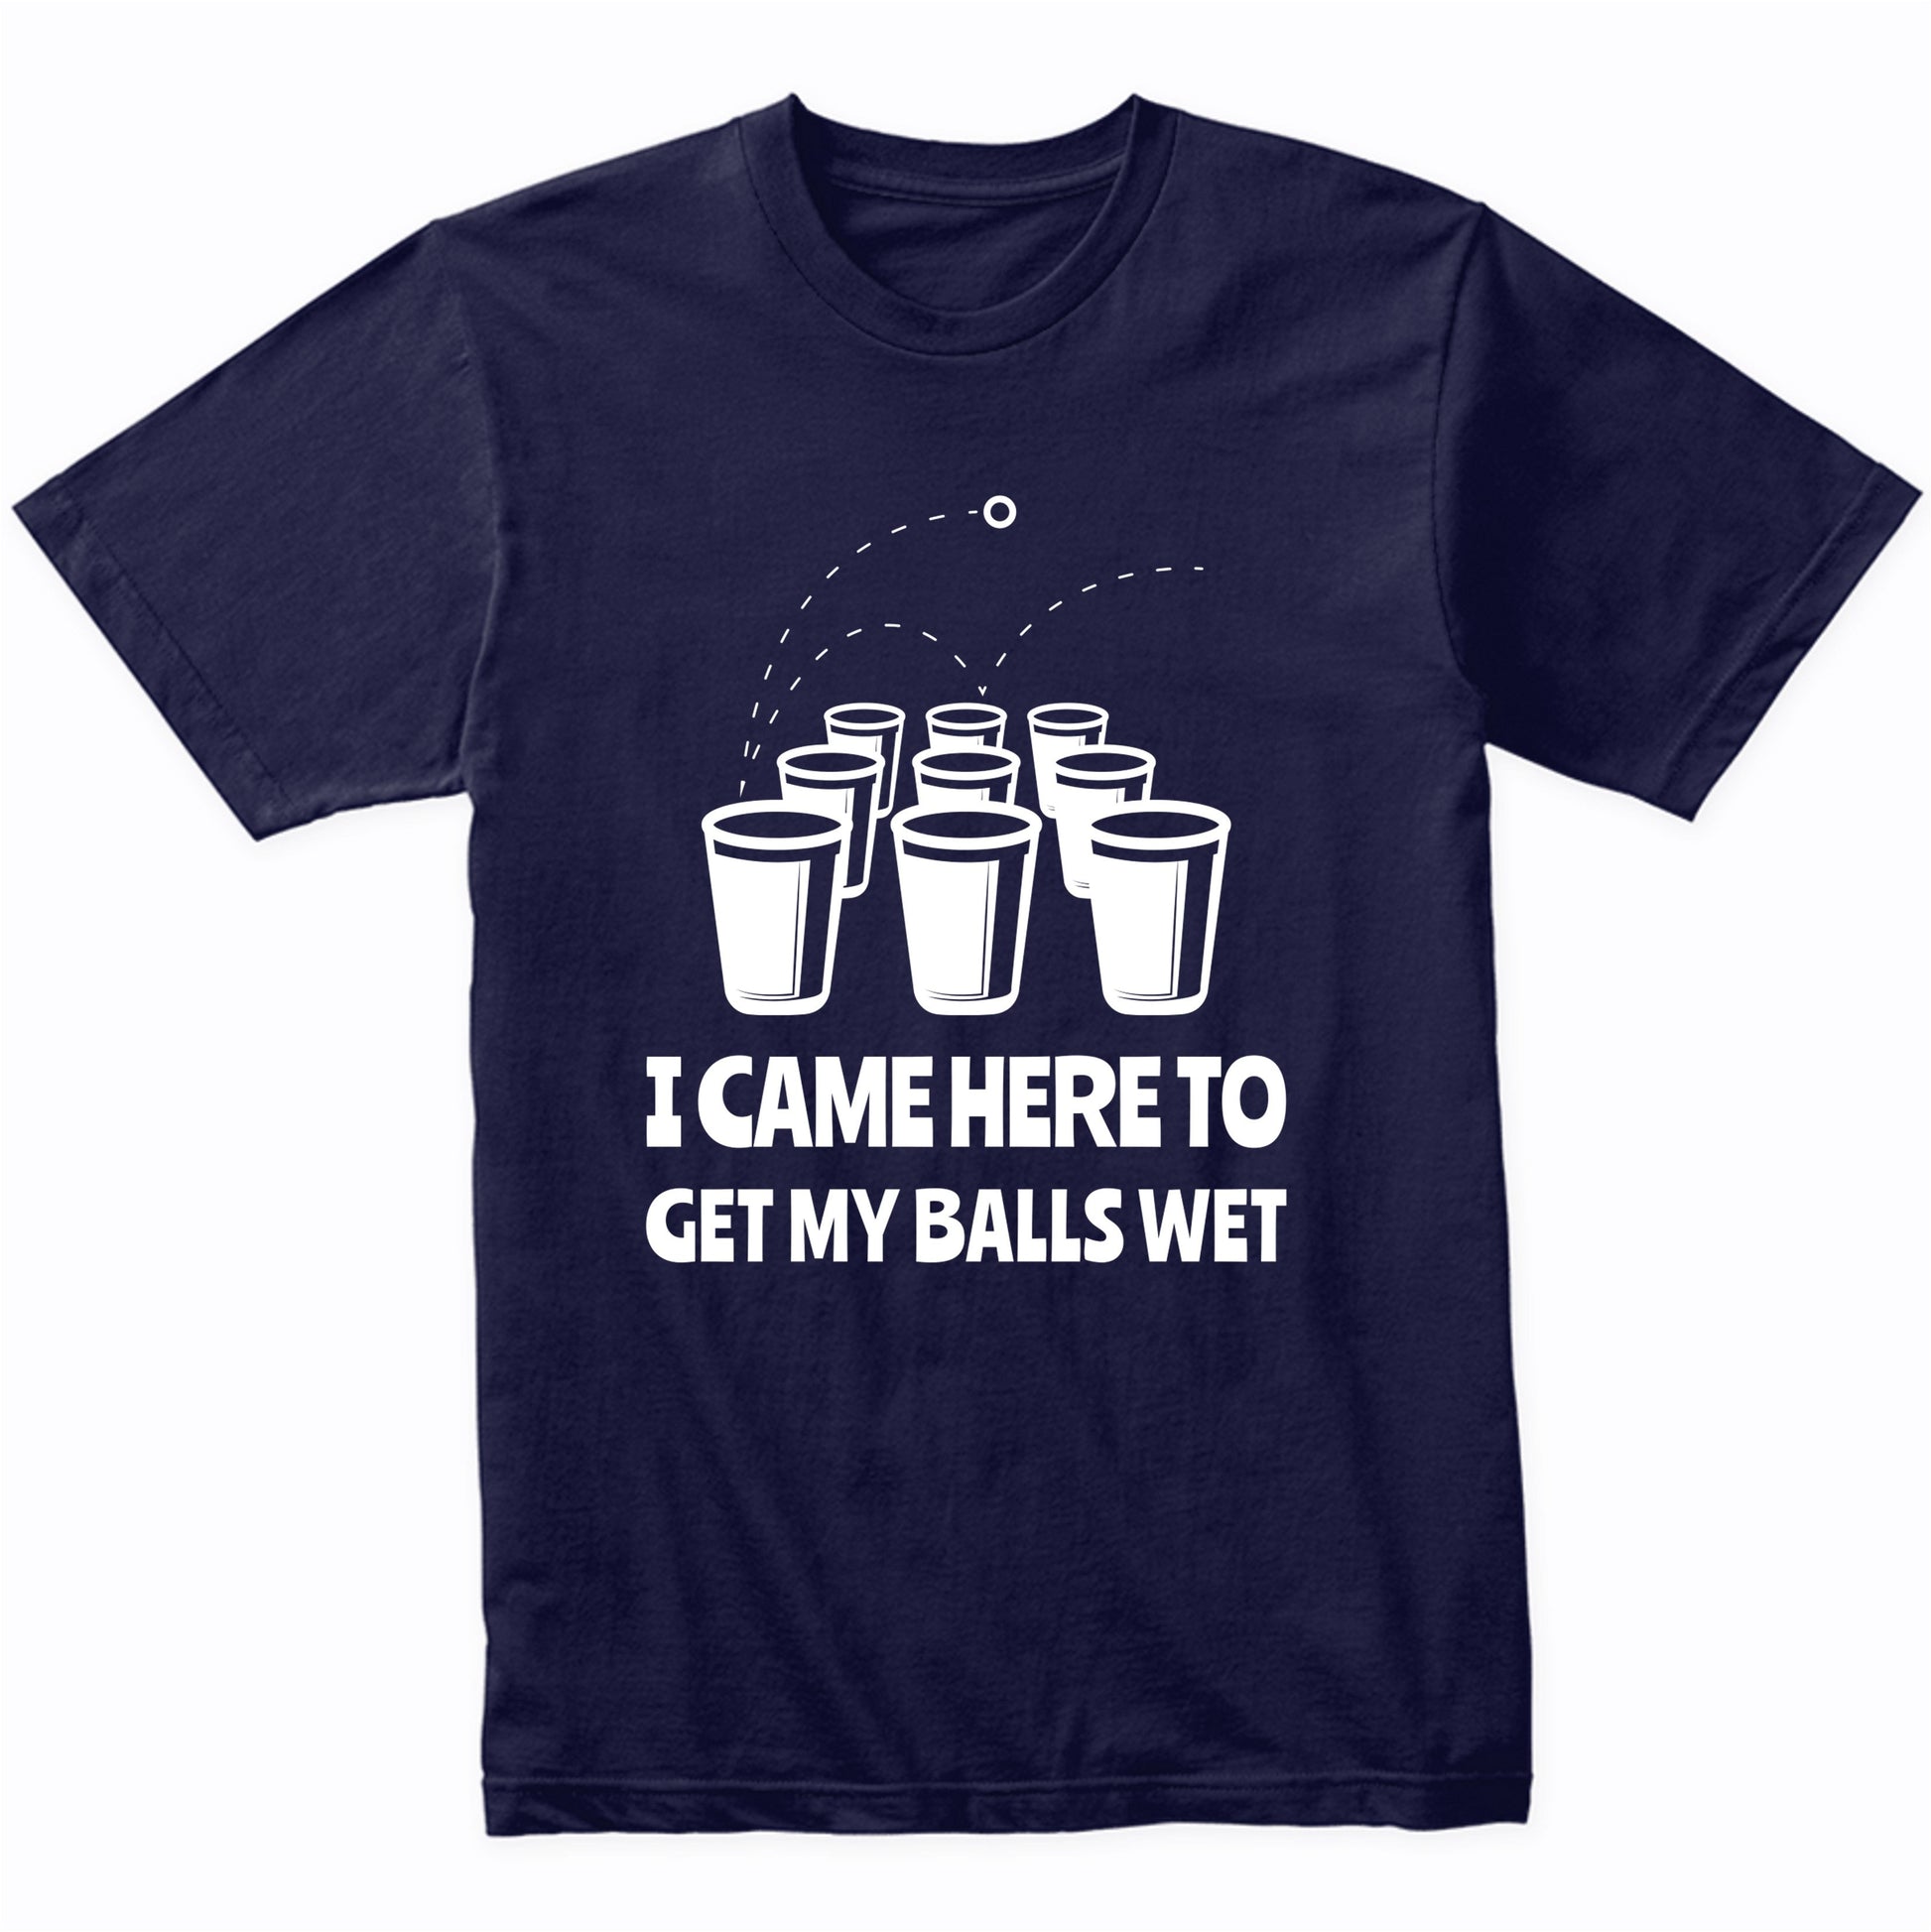 Beer Pong Shirt - I Came Here To Get My Balls Wet Funny T-Shirt